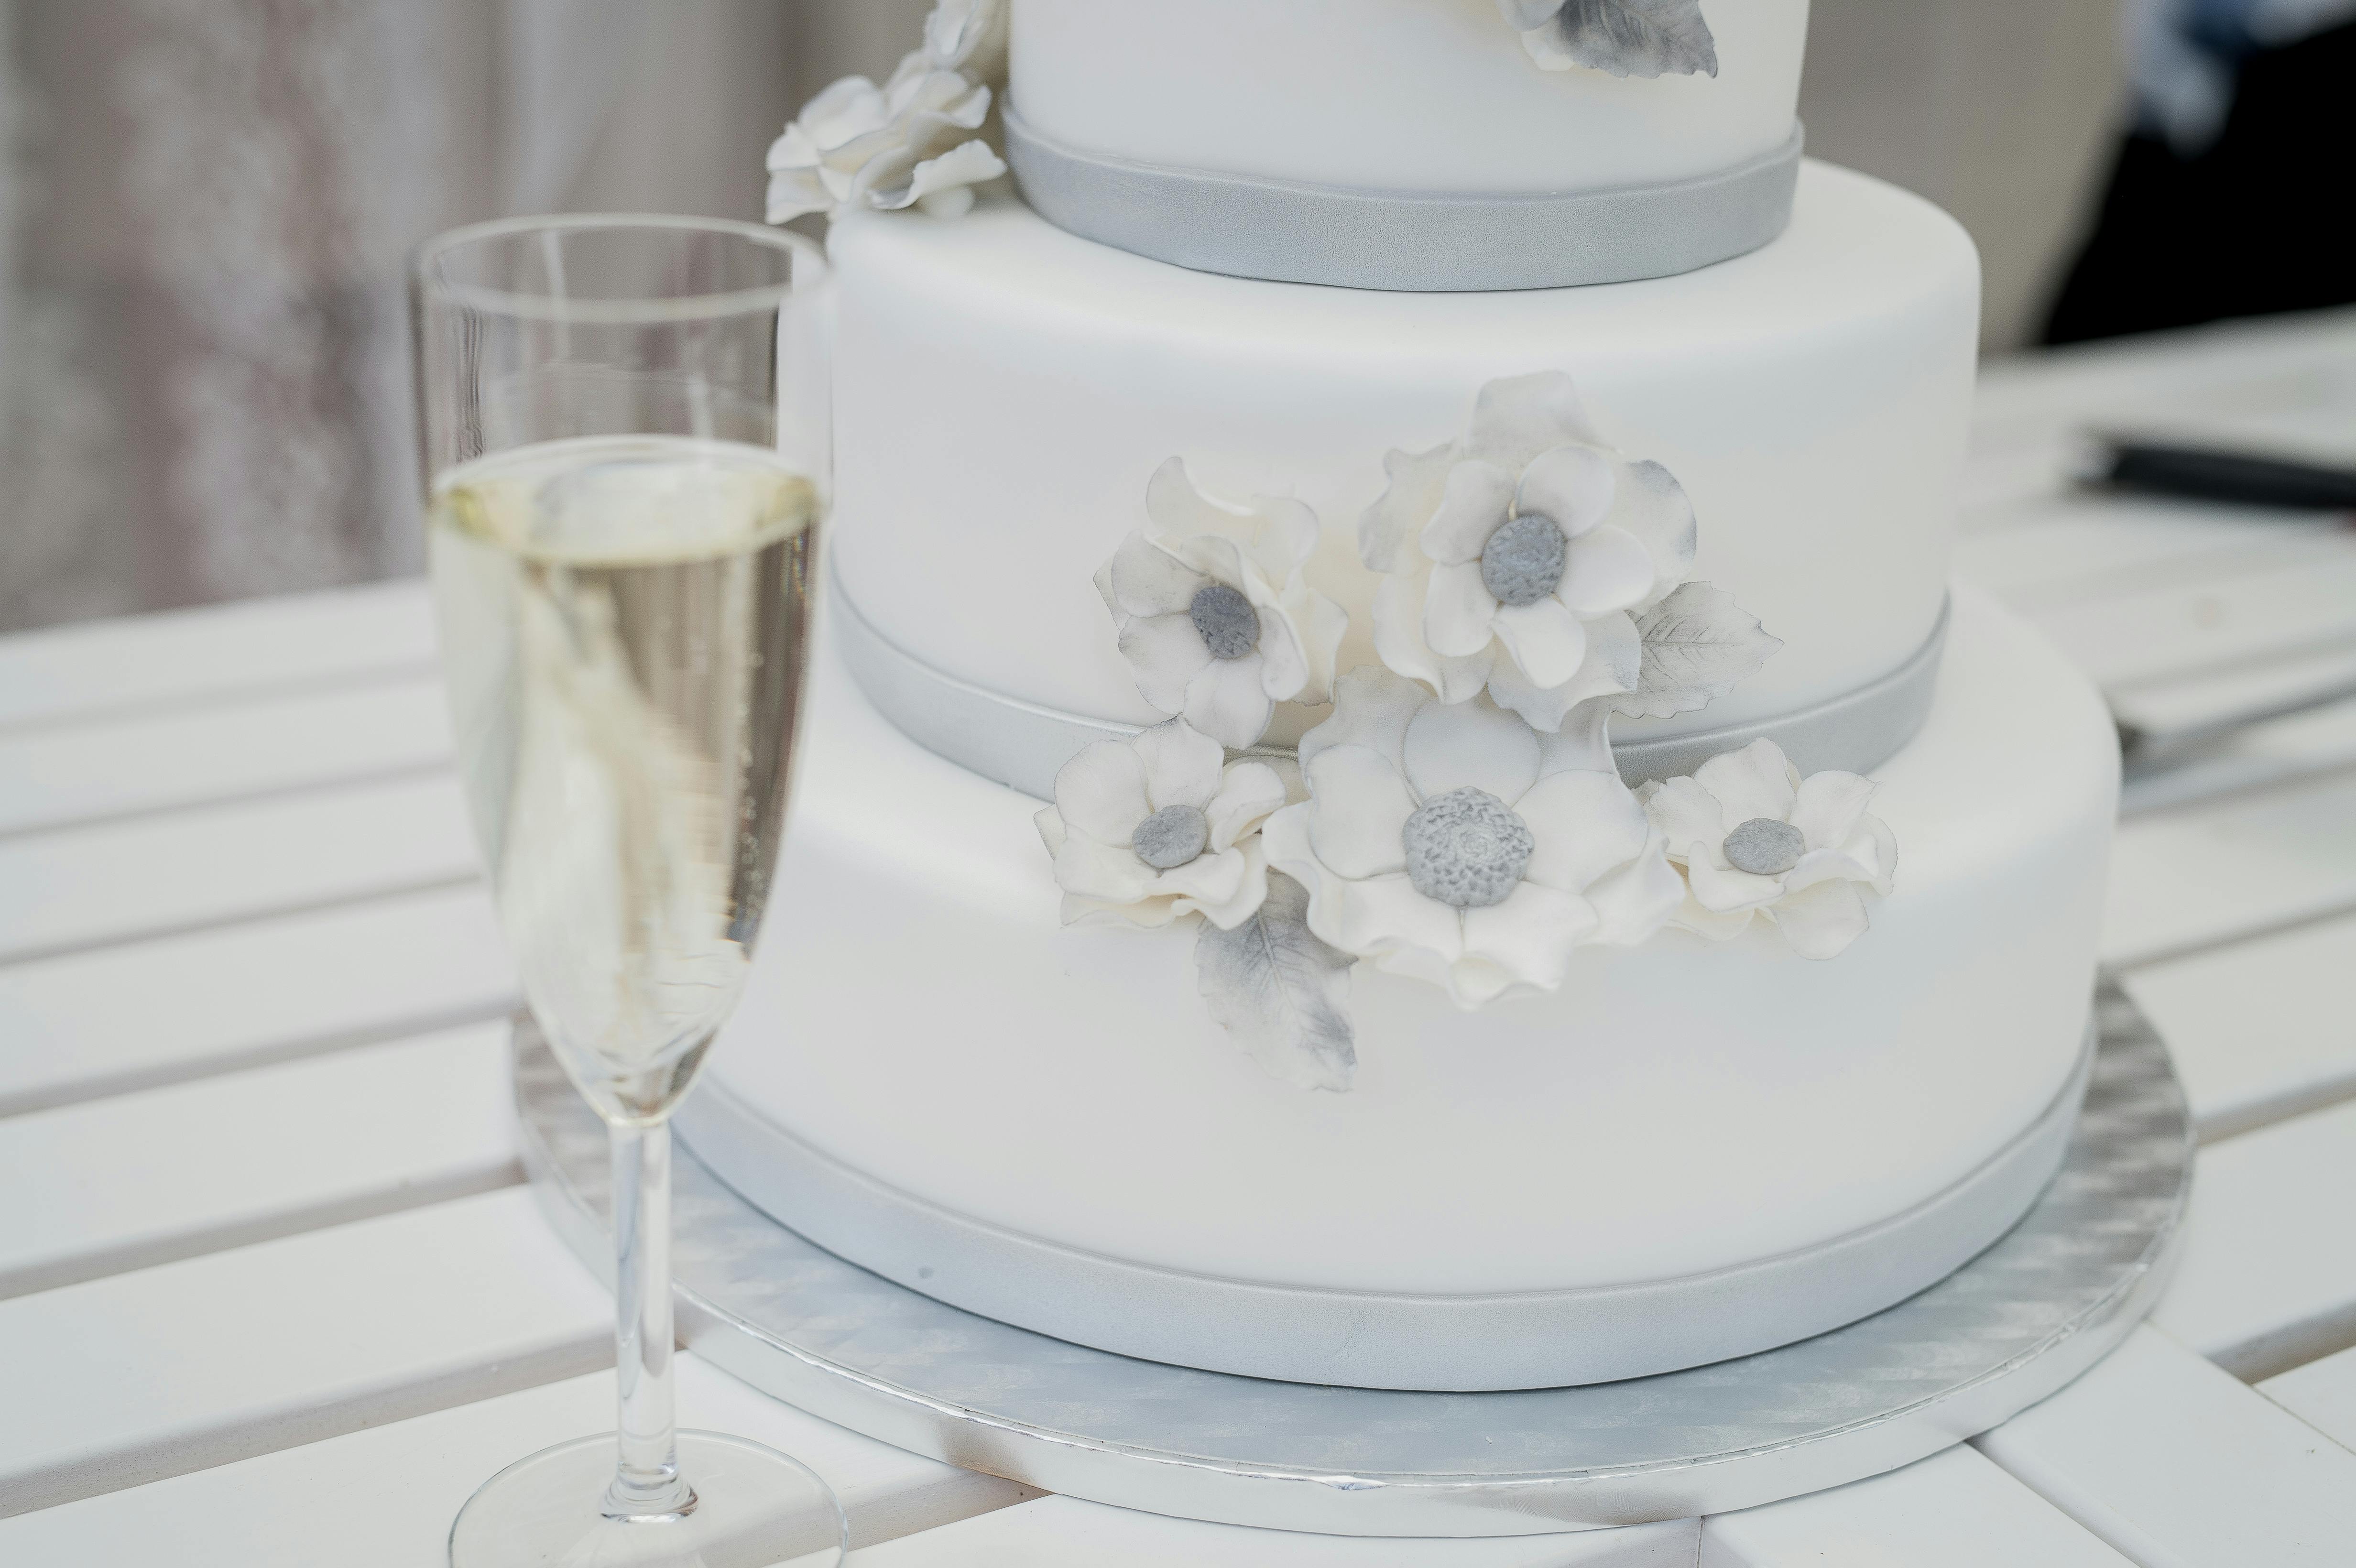 Trending Wedding Cake Designs That are Going to Rule 2022